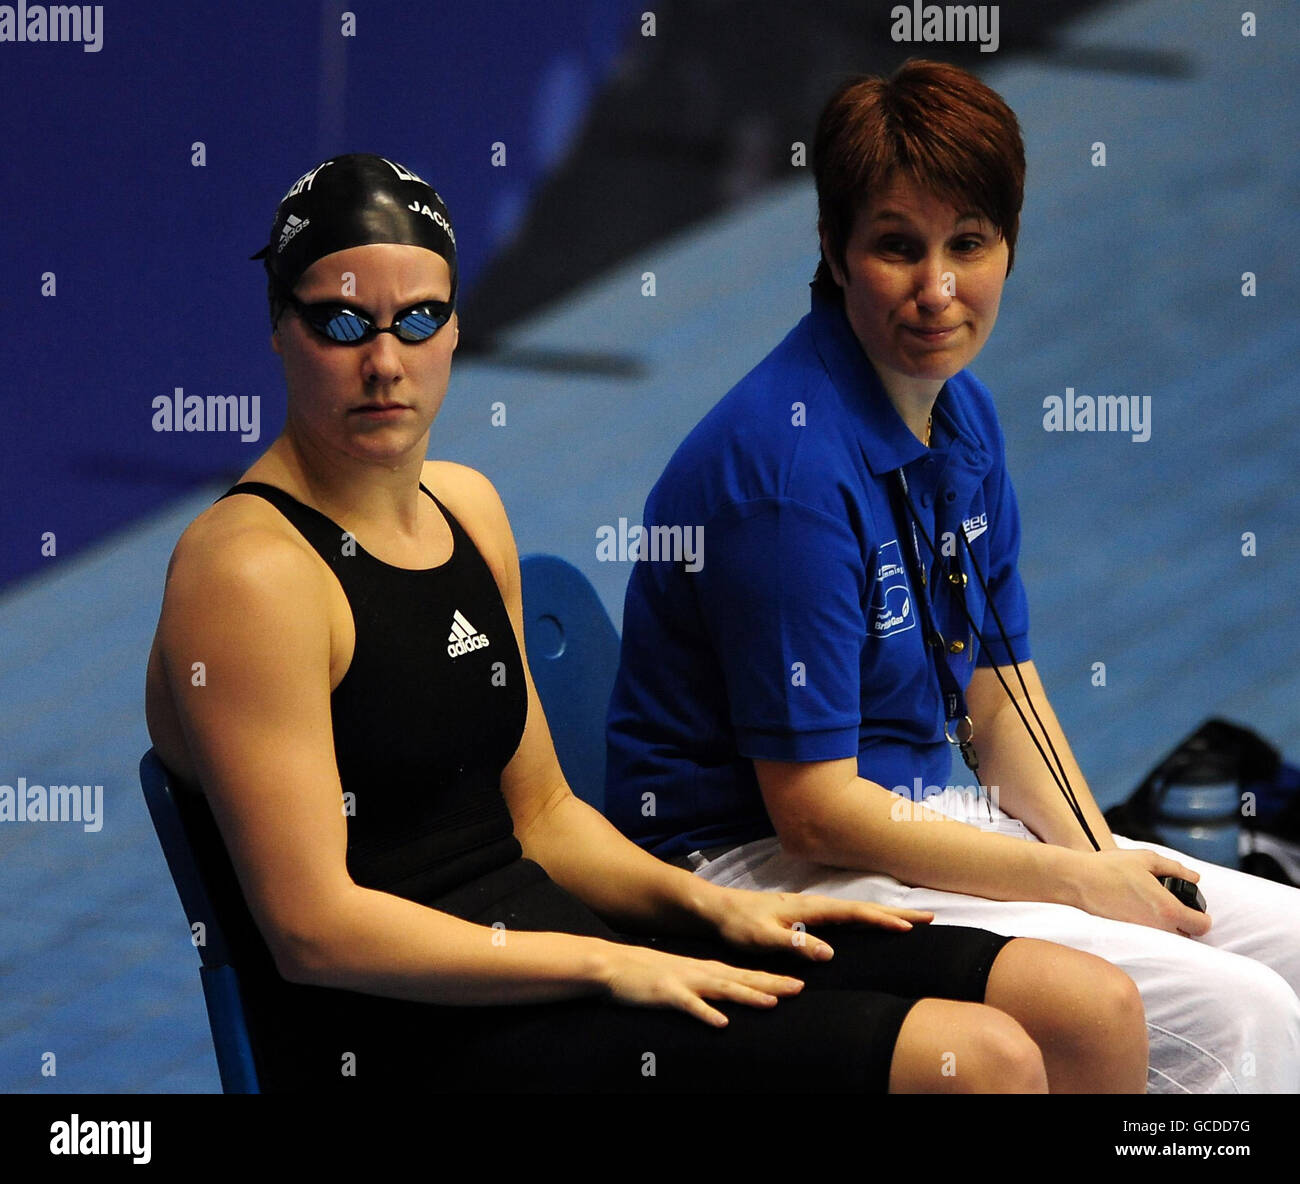 Loughborough University's Joanne Jackson (left) waits to start in the Women's 200m Freestyle heats during the British Swimming Championships at Ponds Forge, Sheffield. Stock Photo